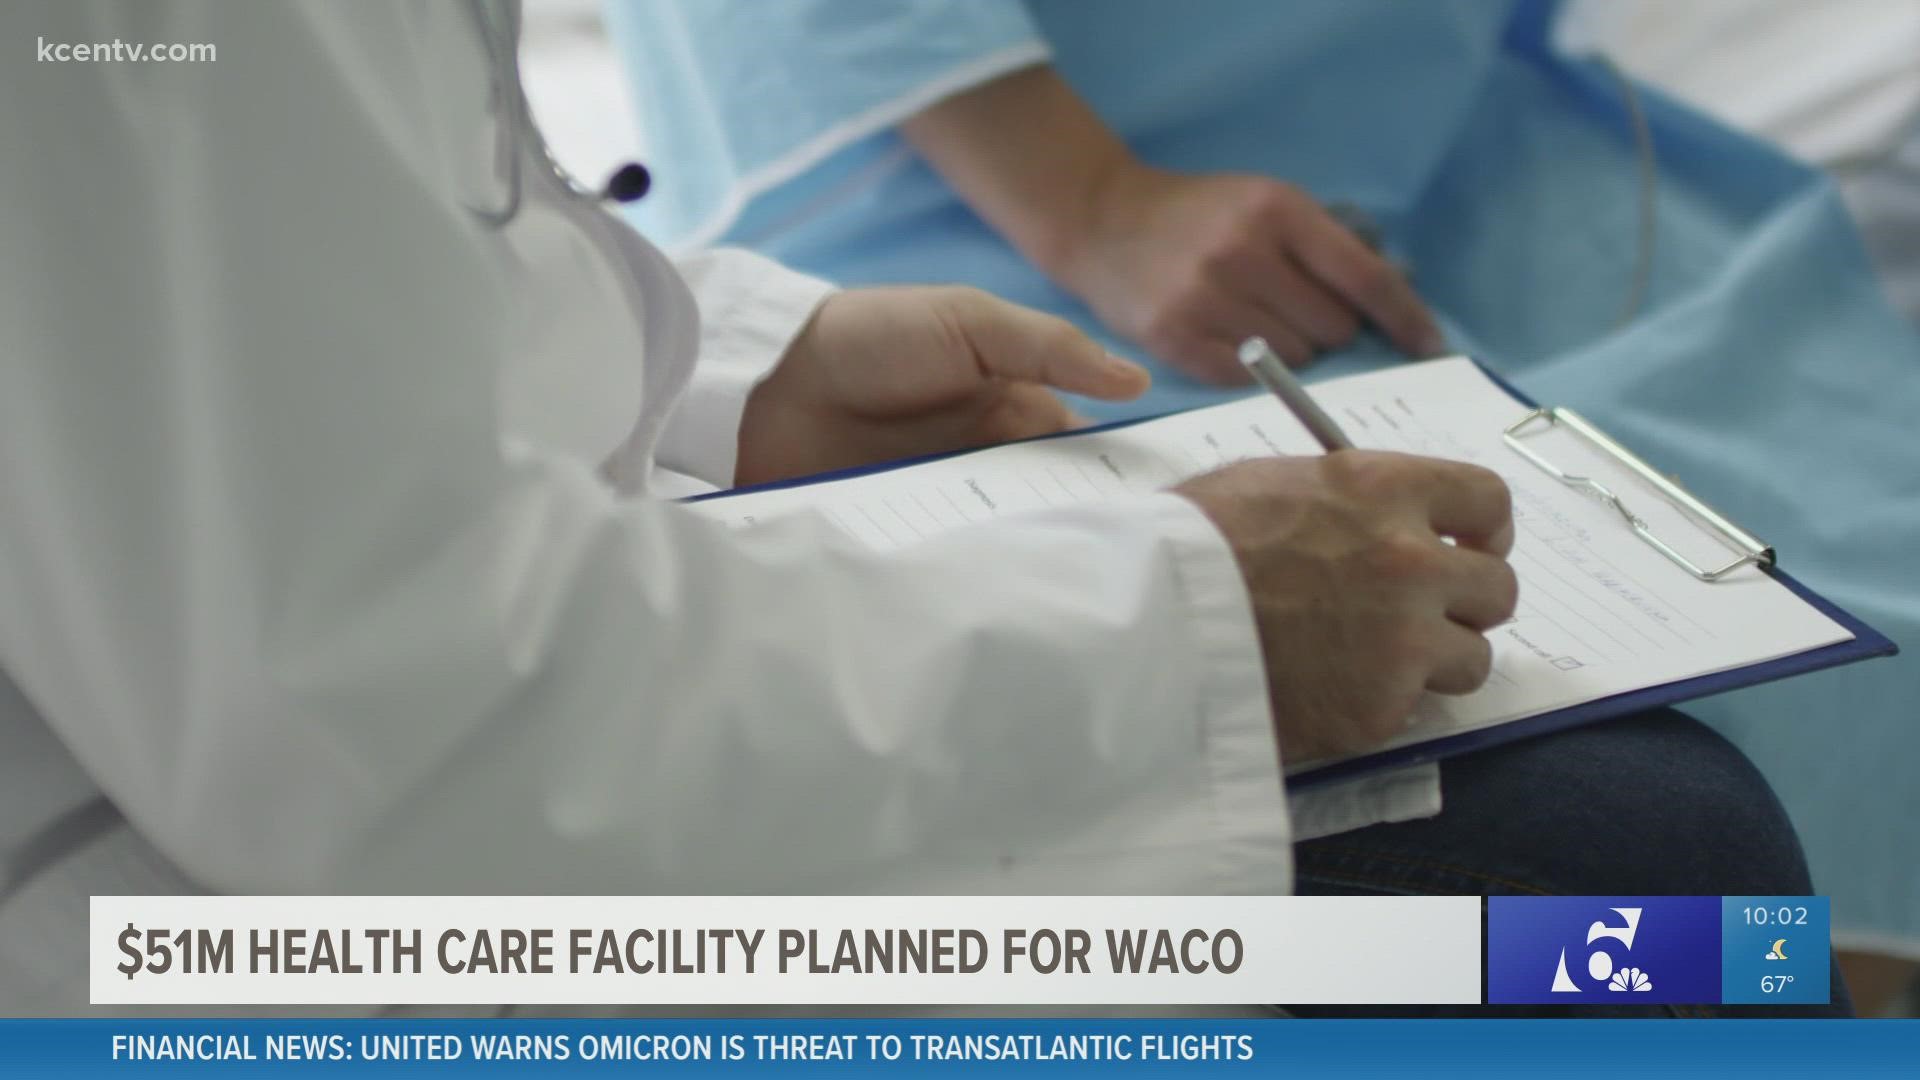 Waco continues its expansion in the city with a new $51 million health care facility. KCEN's Maria Aguilera with more.